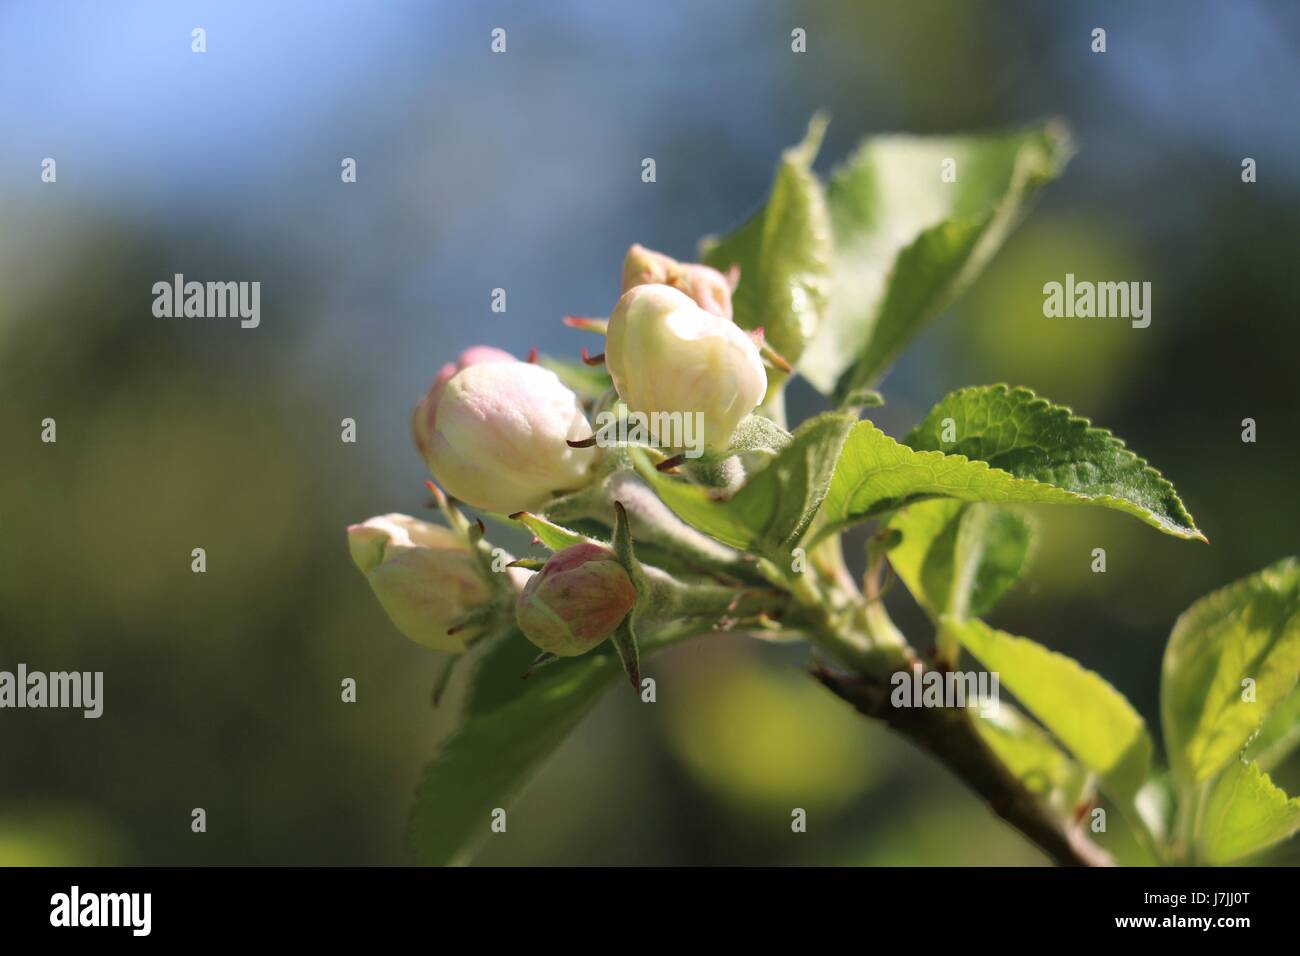 White and pink Discovery Apple Blossom buds opening in the Spring sunshine in Shropshire, England Stock Photo